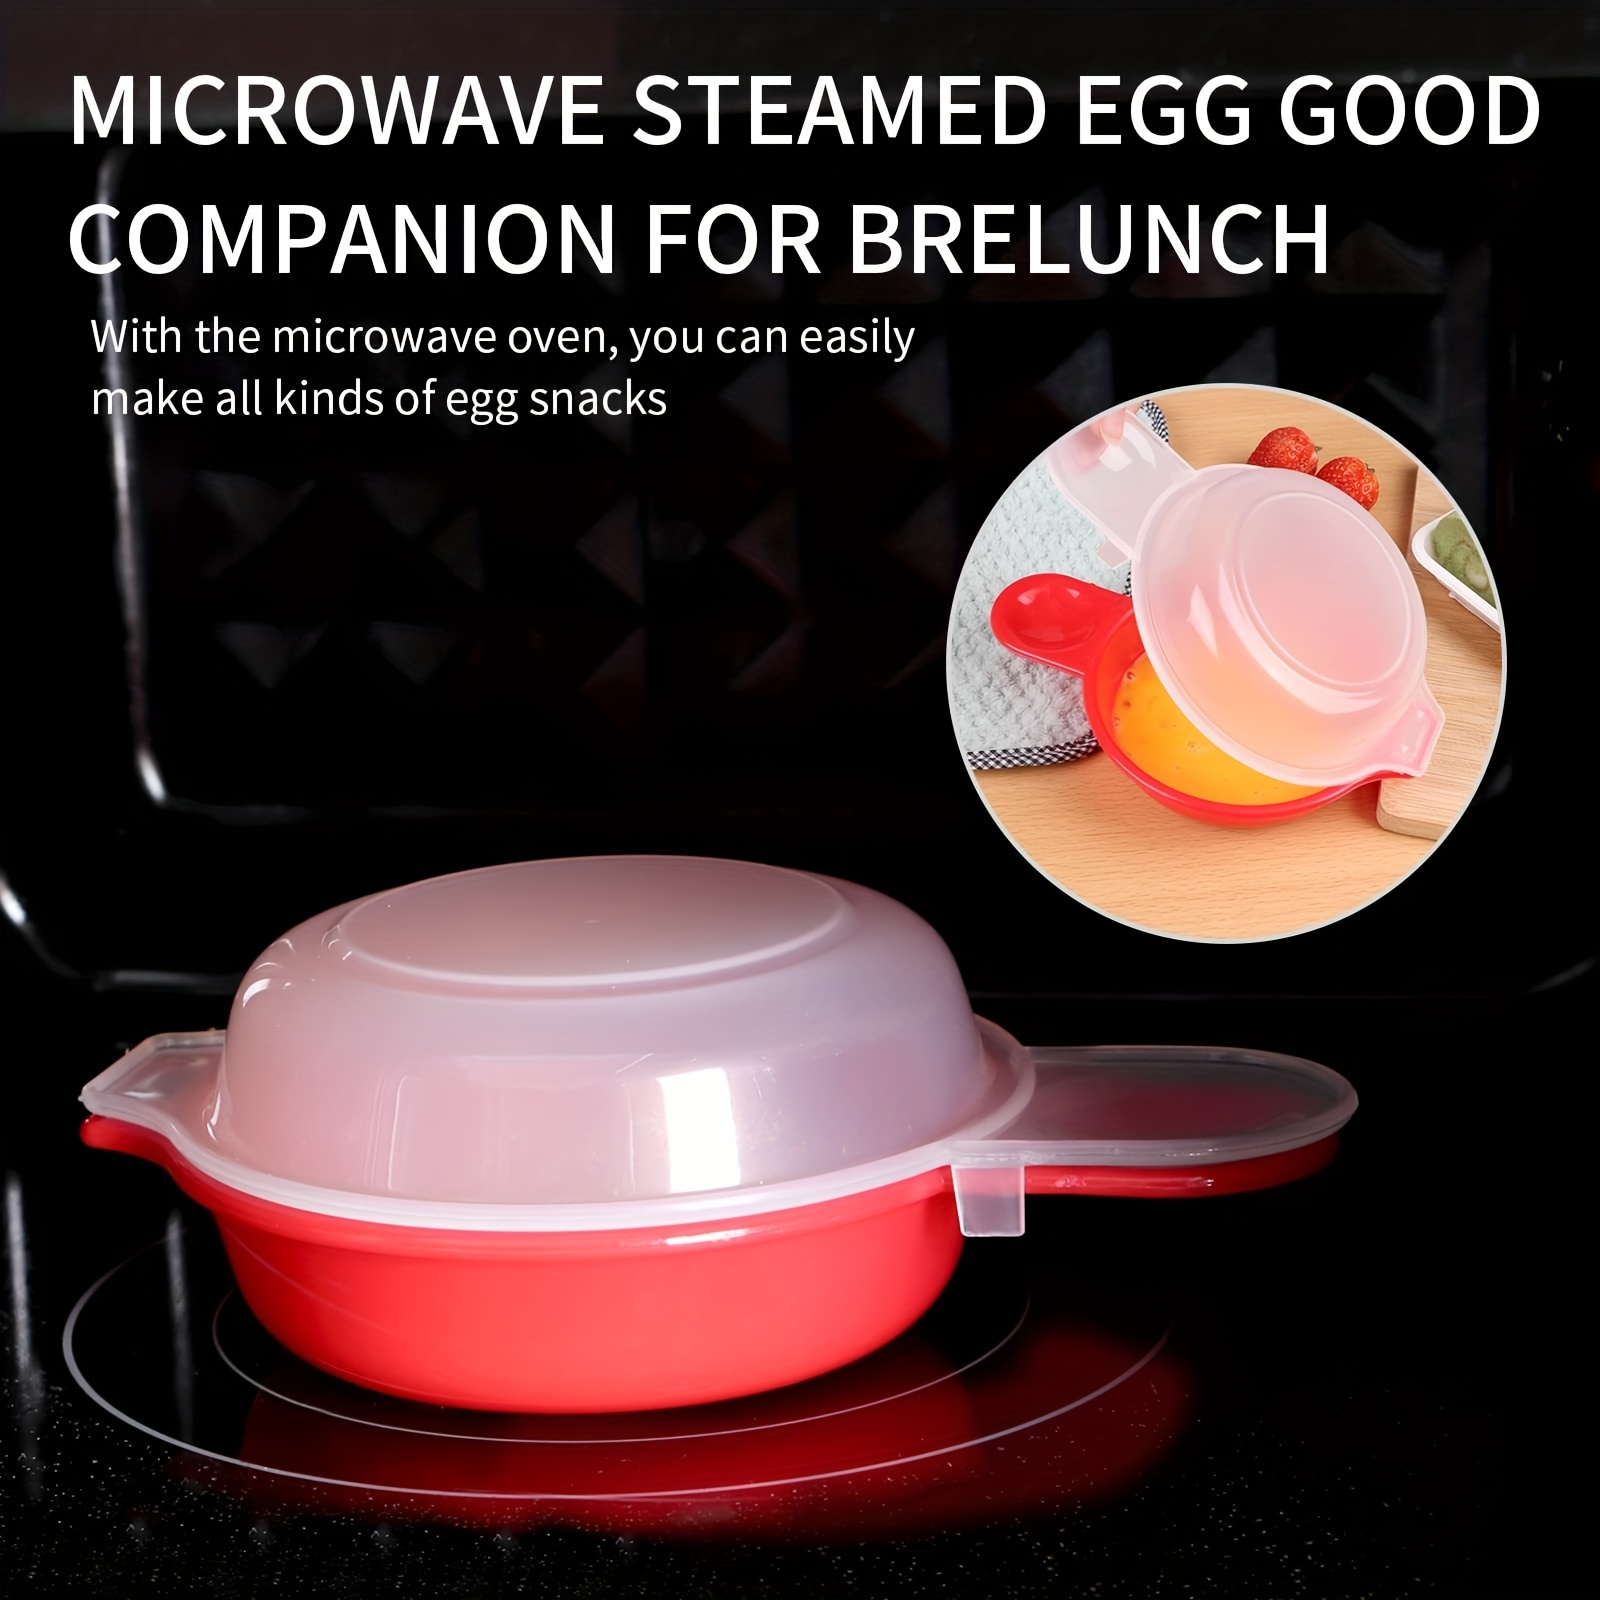 Easy Eggwich Egg Cooker, Microwave, Shop